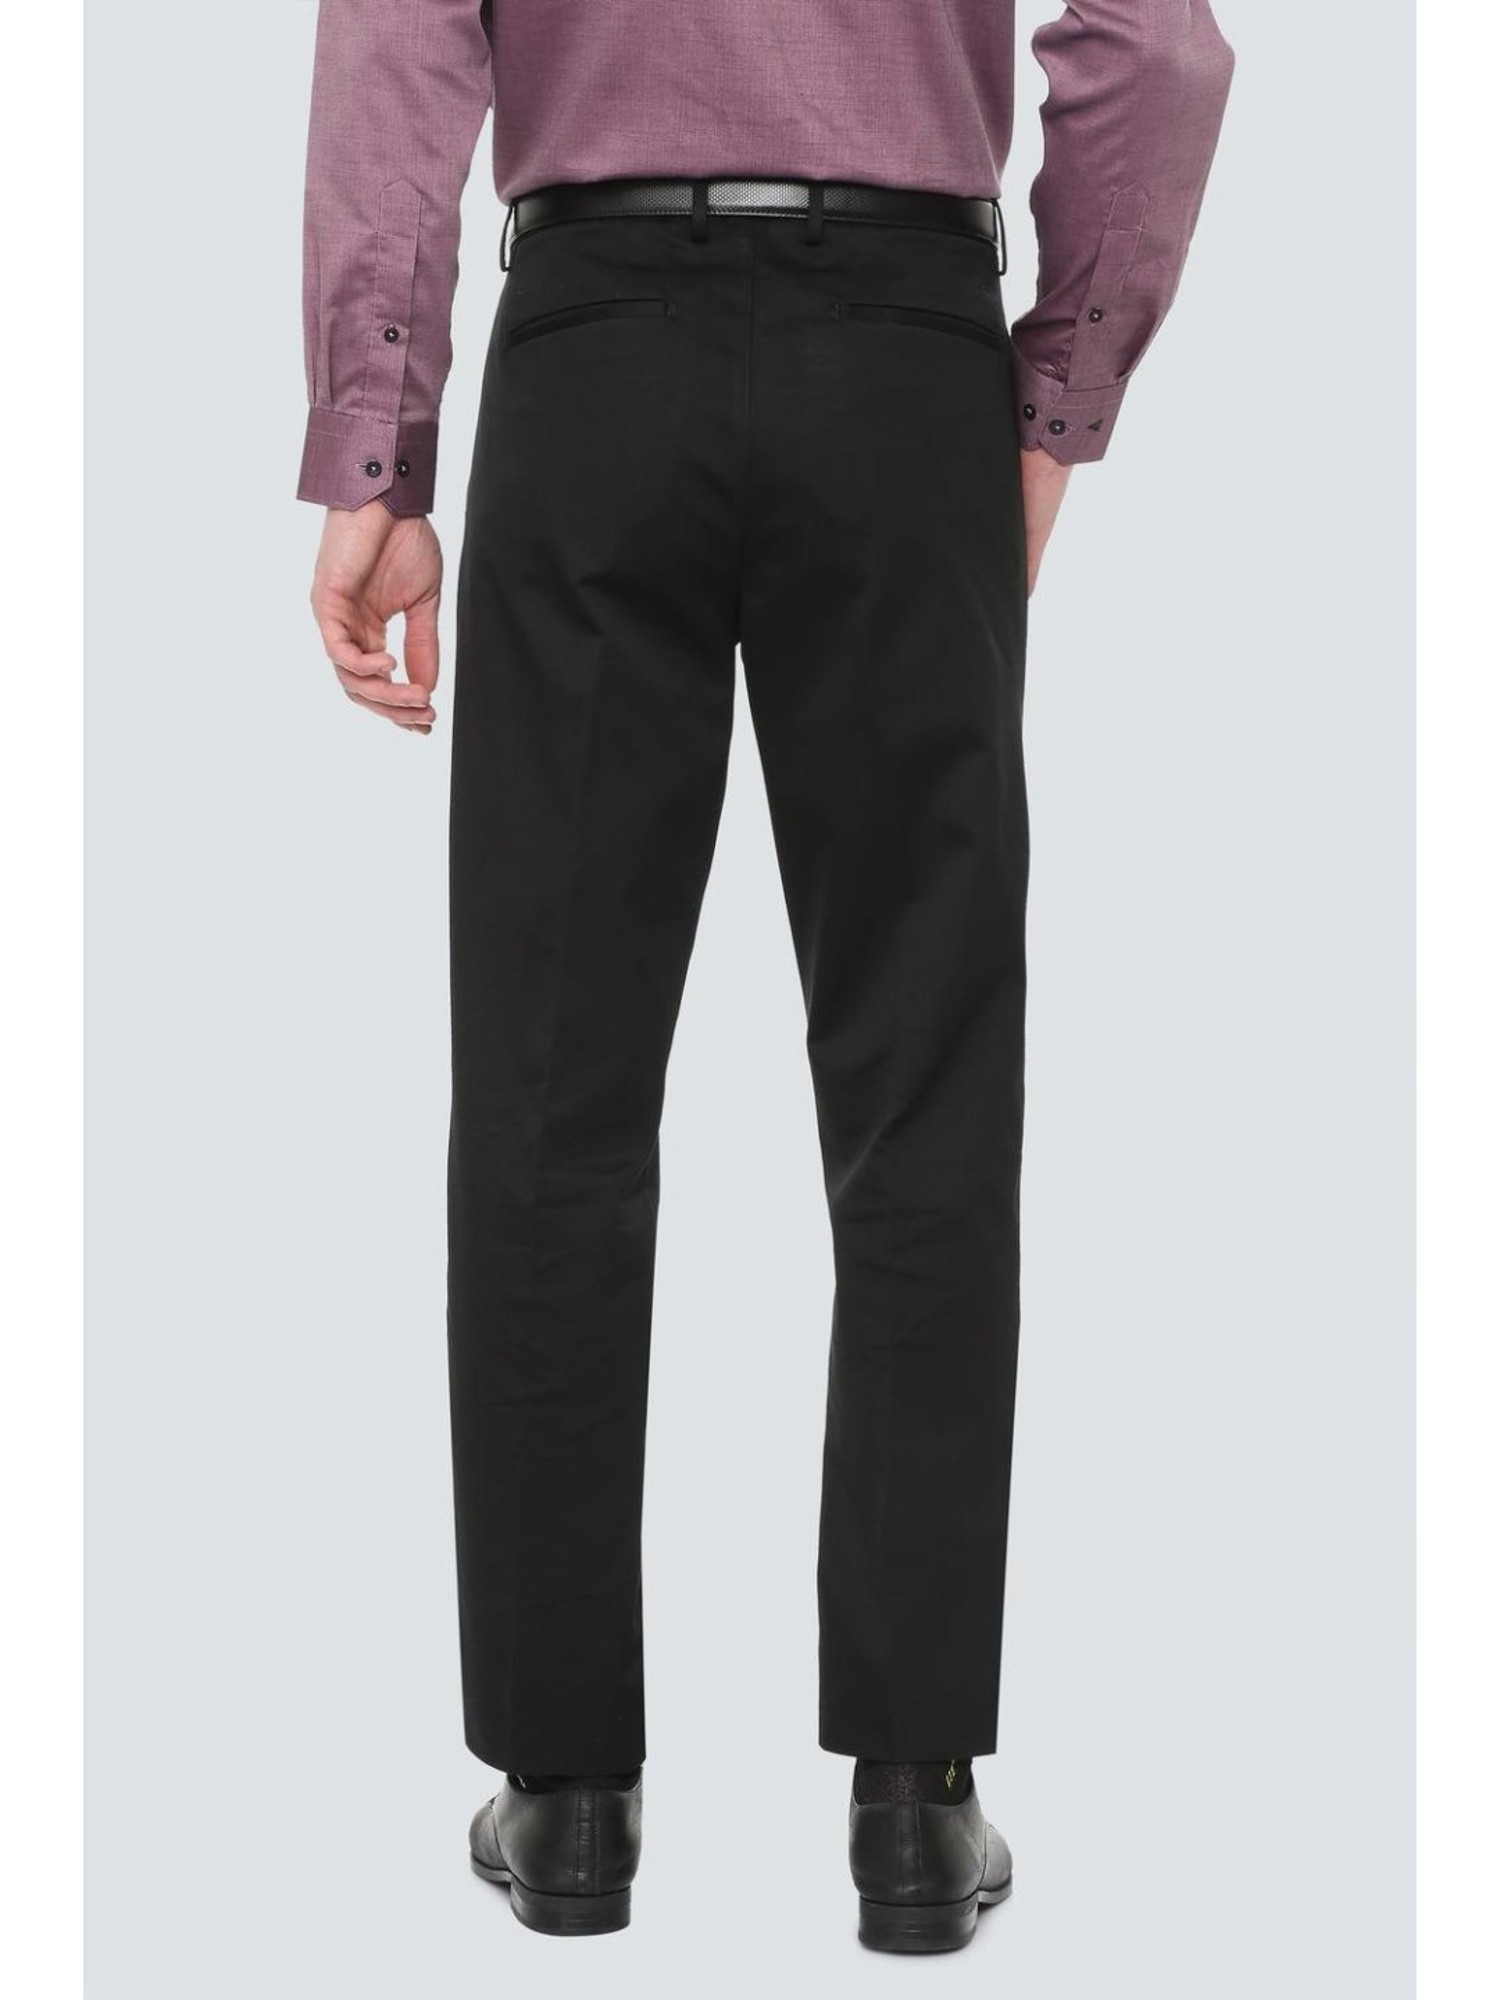 Louis Philippe Formal Trousers  Buy Louis Philippe Men Navy Regular Fit  Stripe Pleated Formal Trousers Online  Nykaa Fashion